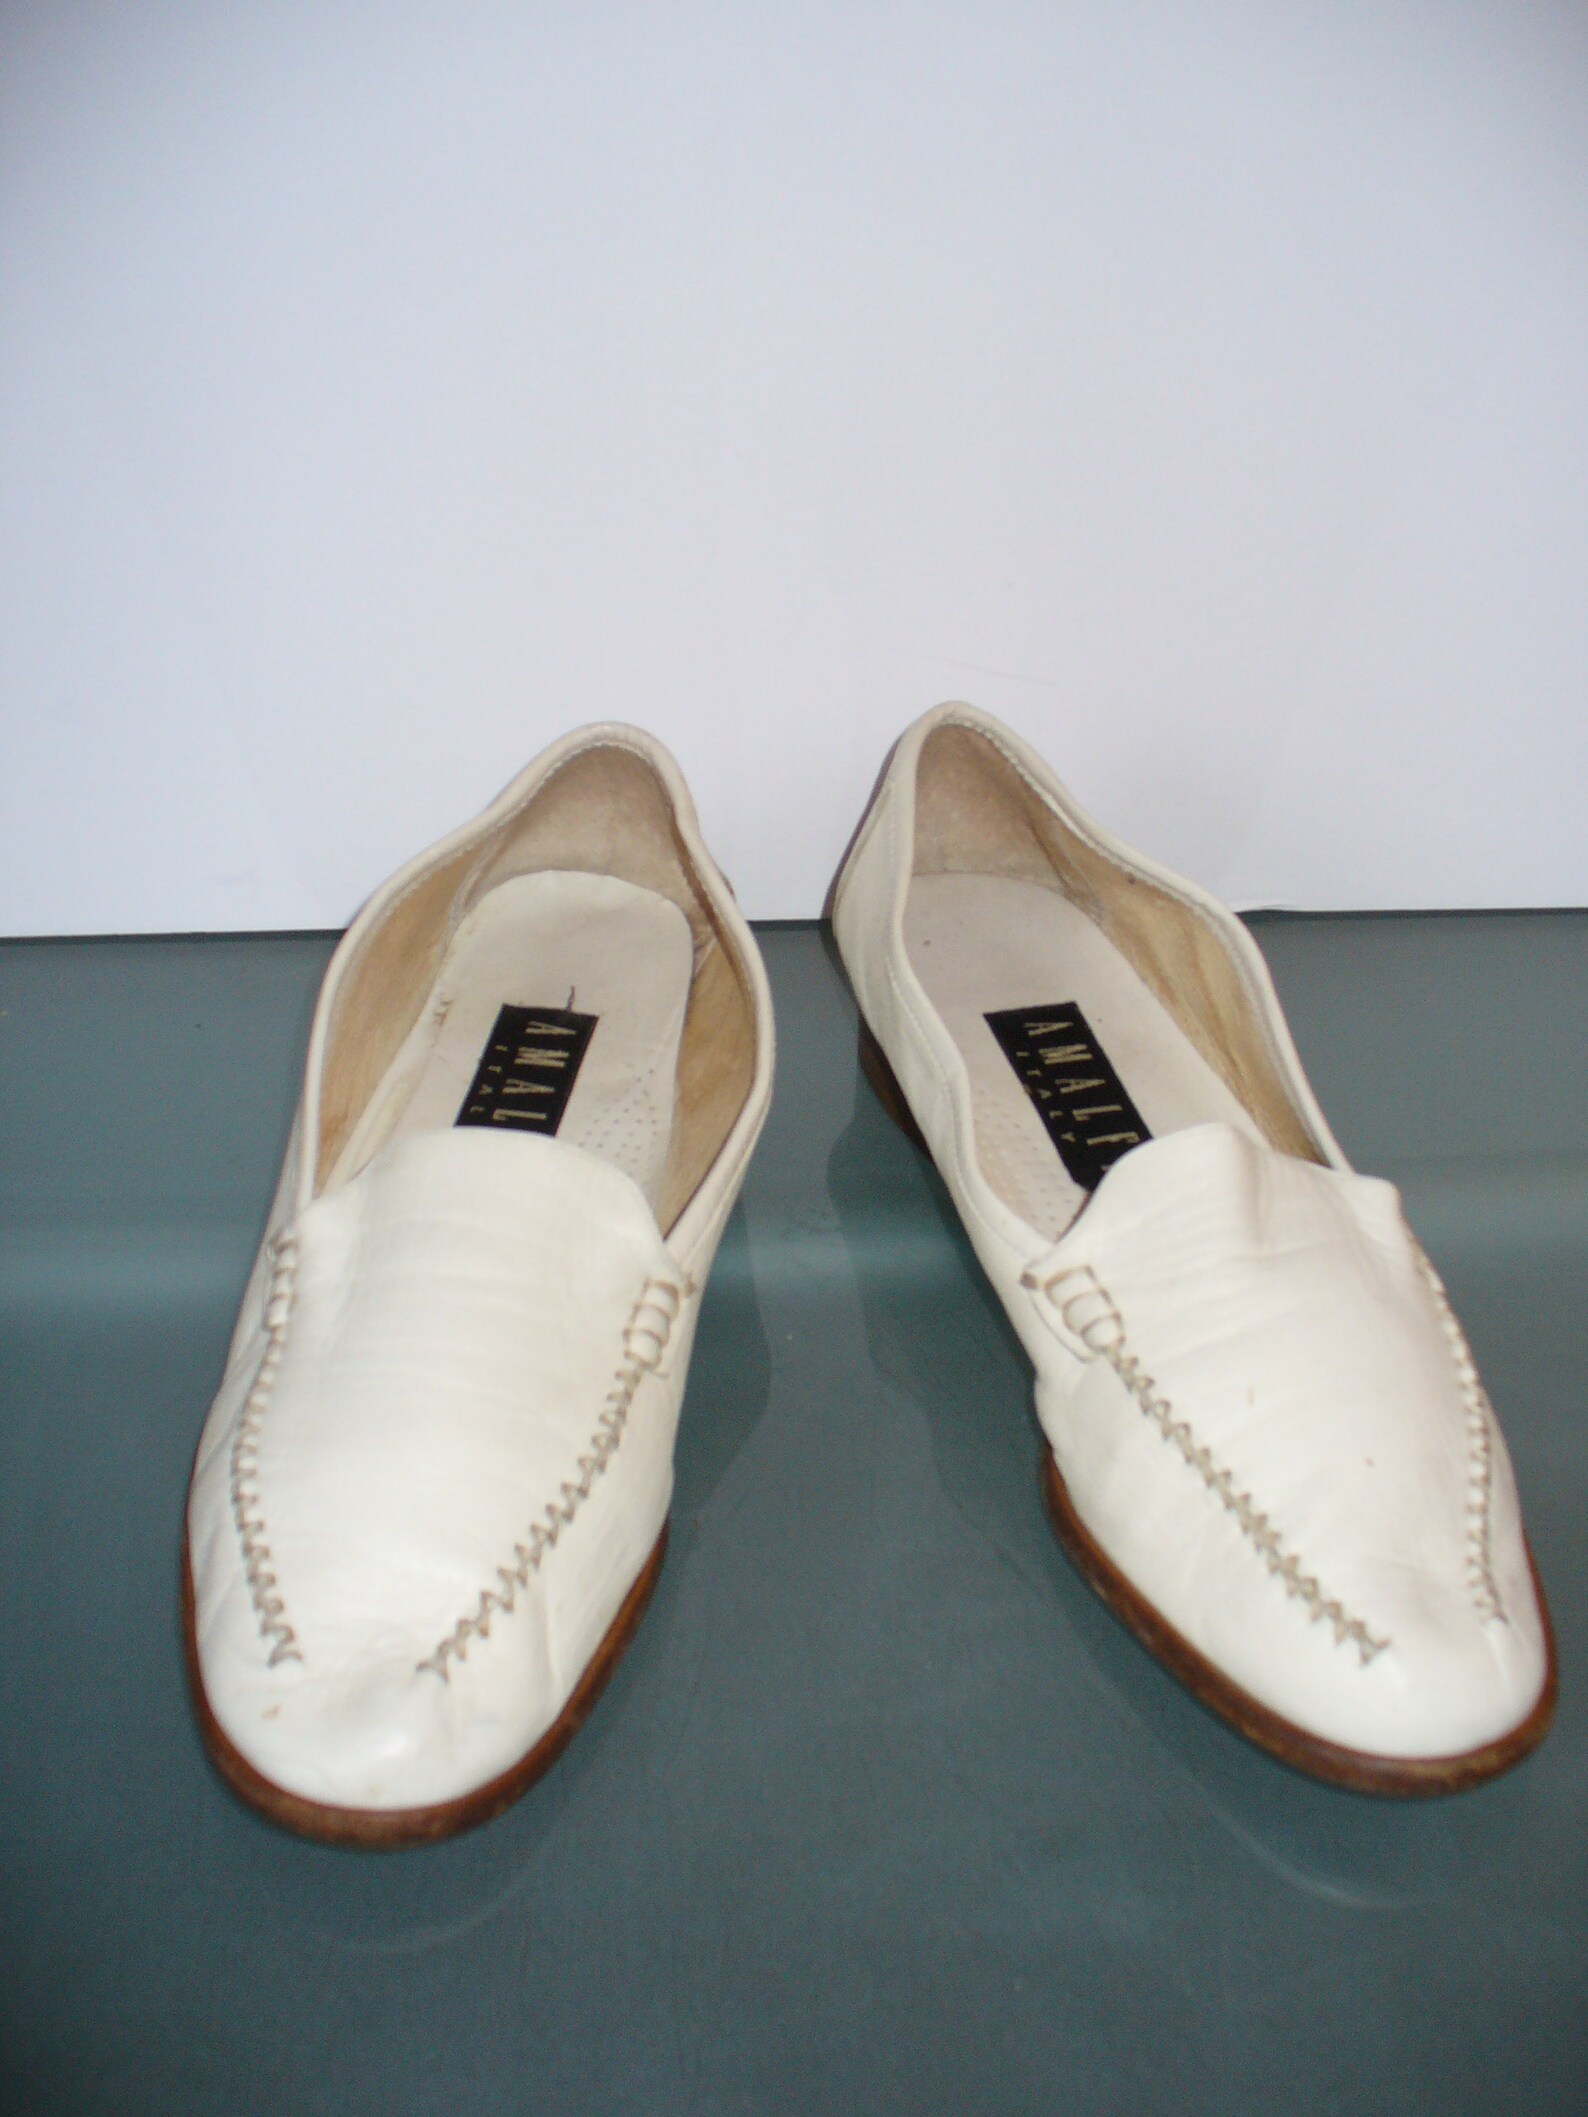 Amalfi Made in Italy White Leather Loafers Size 9 - Etsy